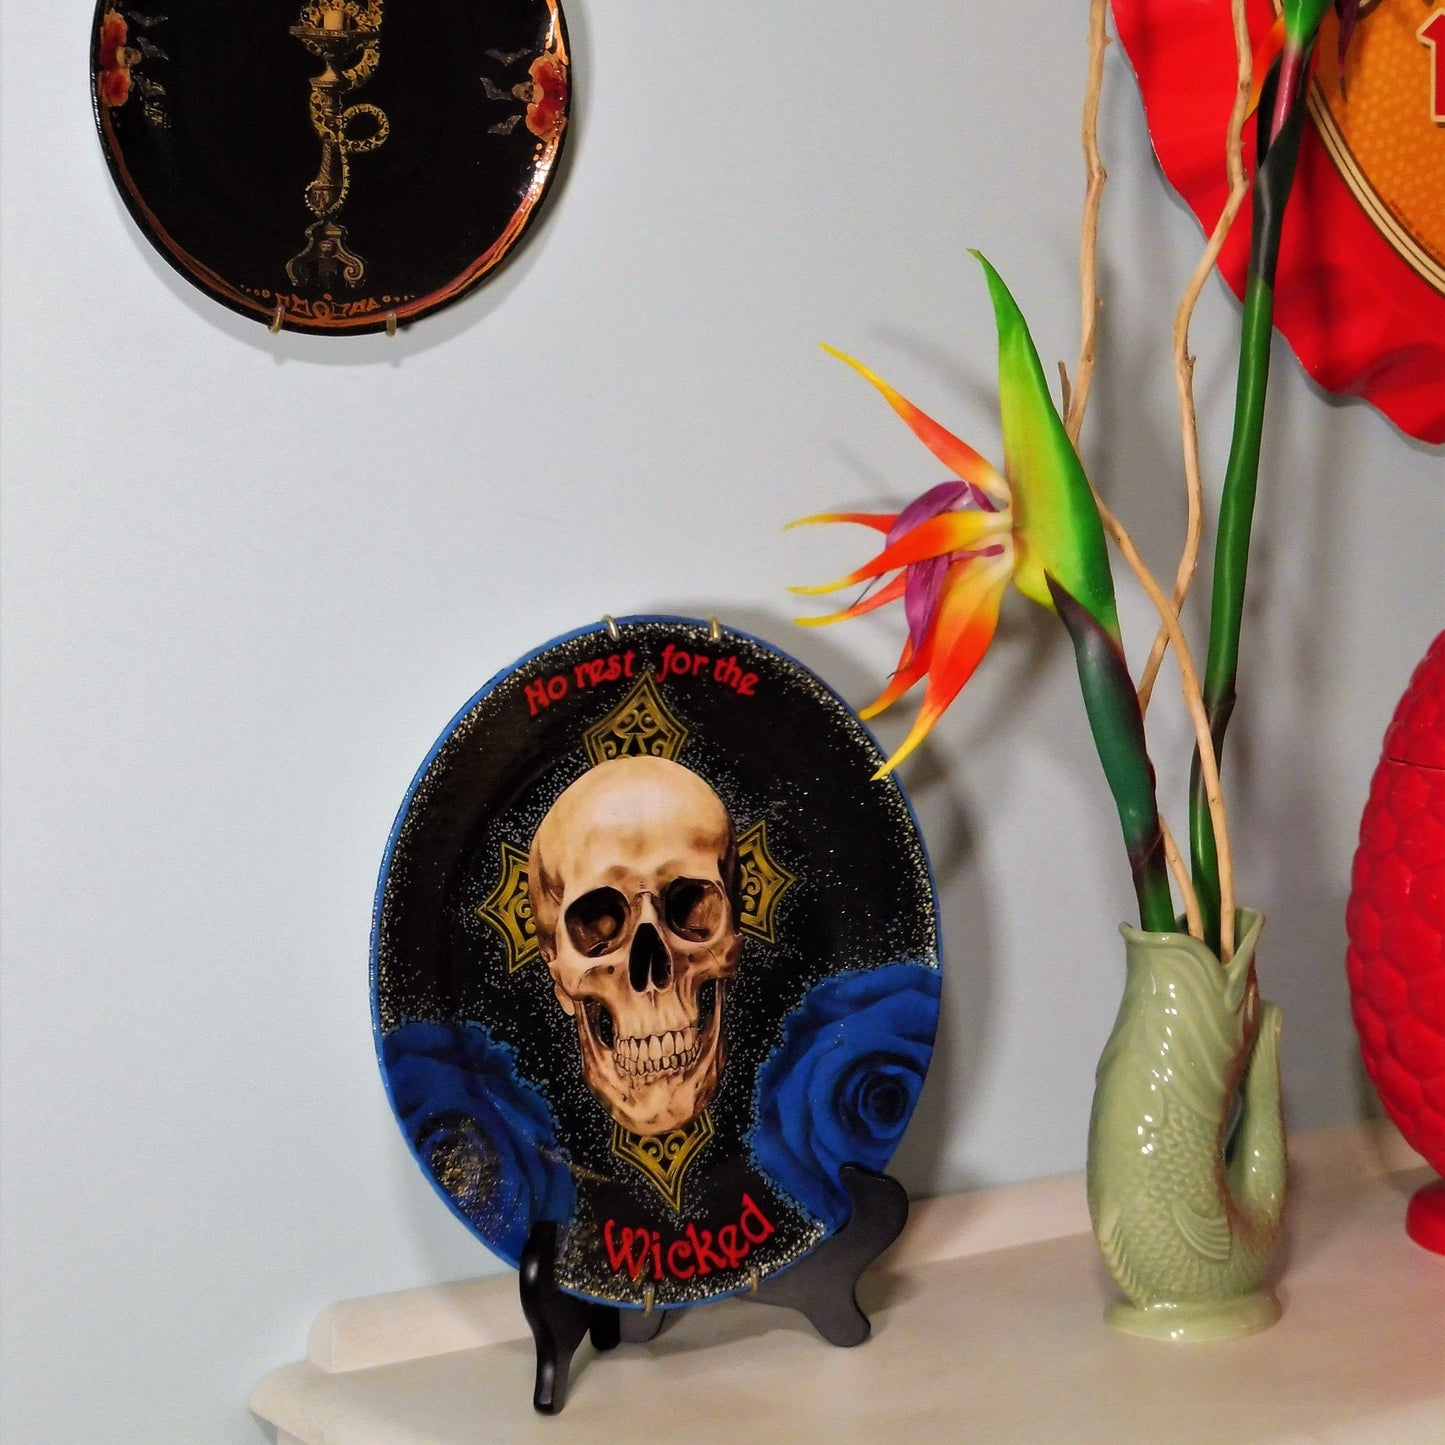 House of Frisson "No Rest For The Wicked" Black Wall Plate front. Collage artwork featuring a skull, a cross, and blue roses, on a black background. Plate on plate stand, resting on a side table.